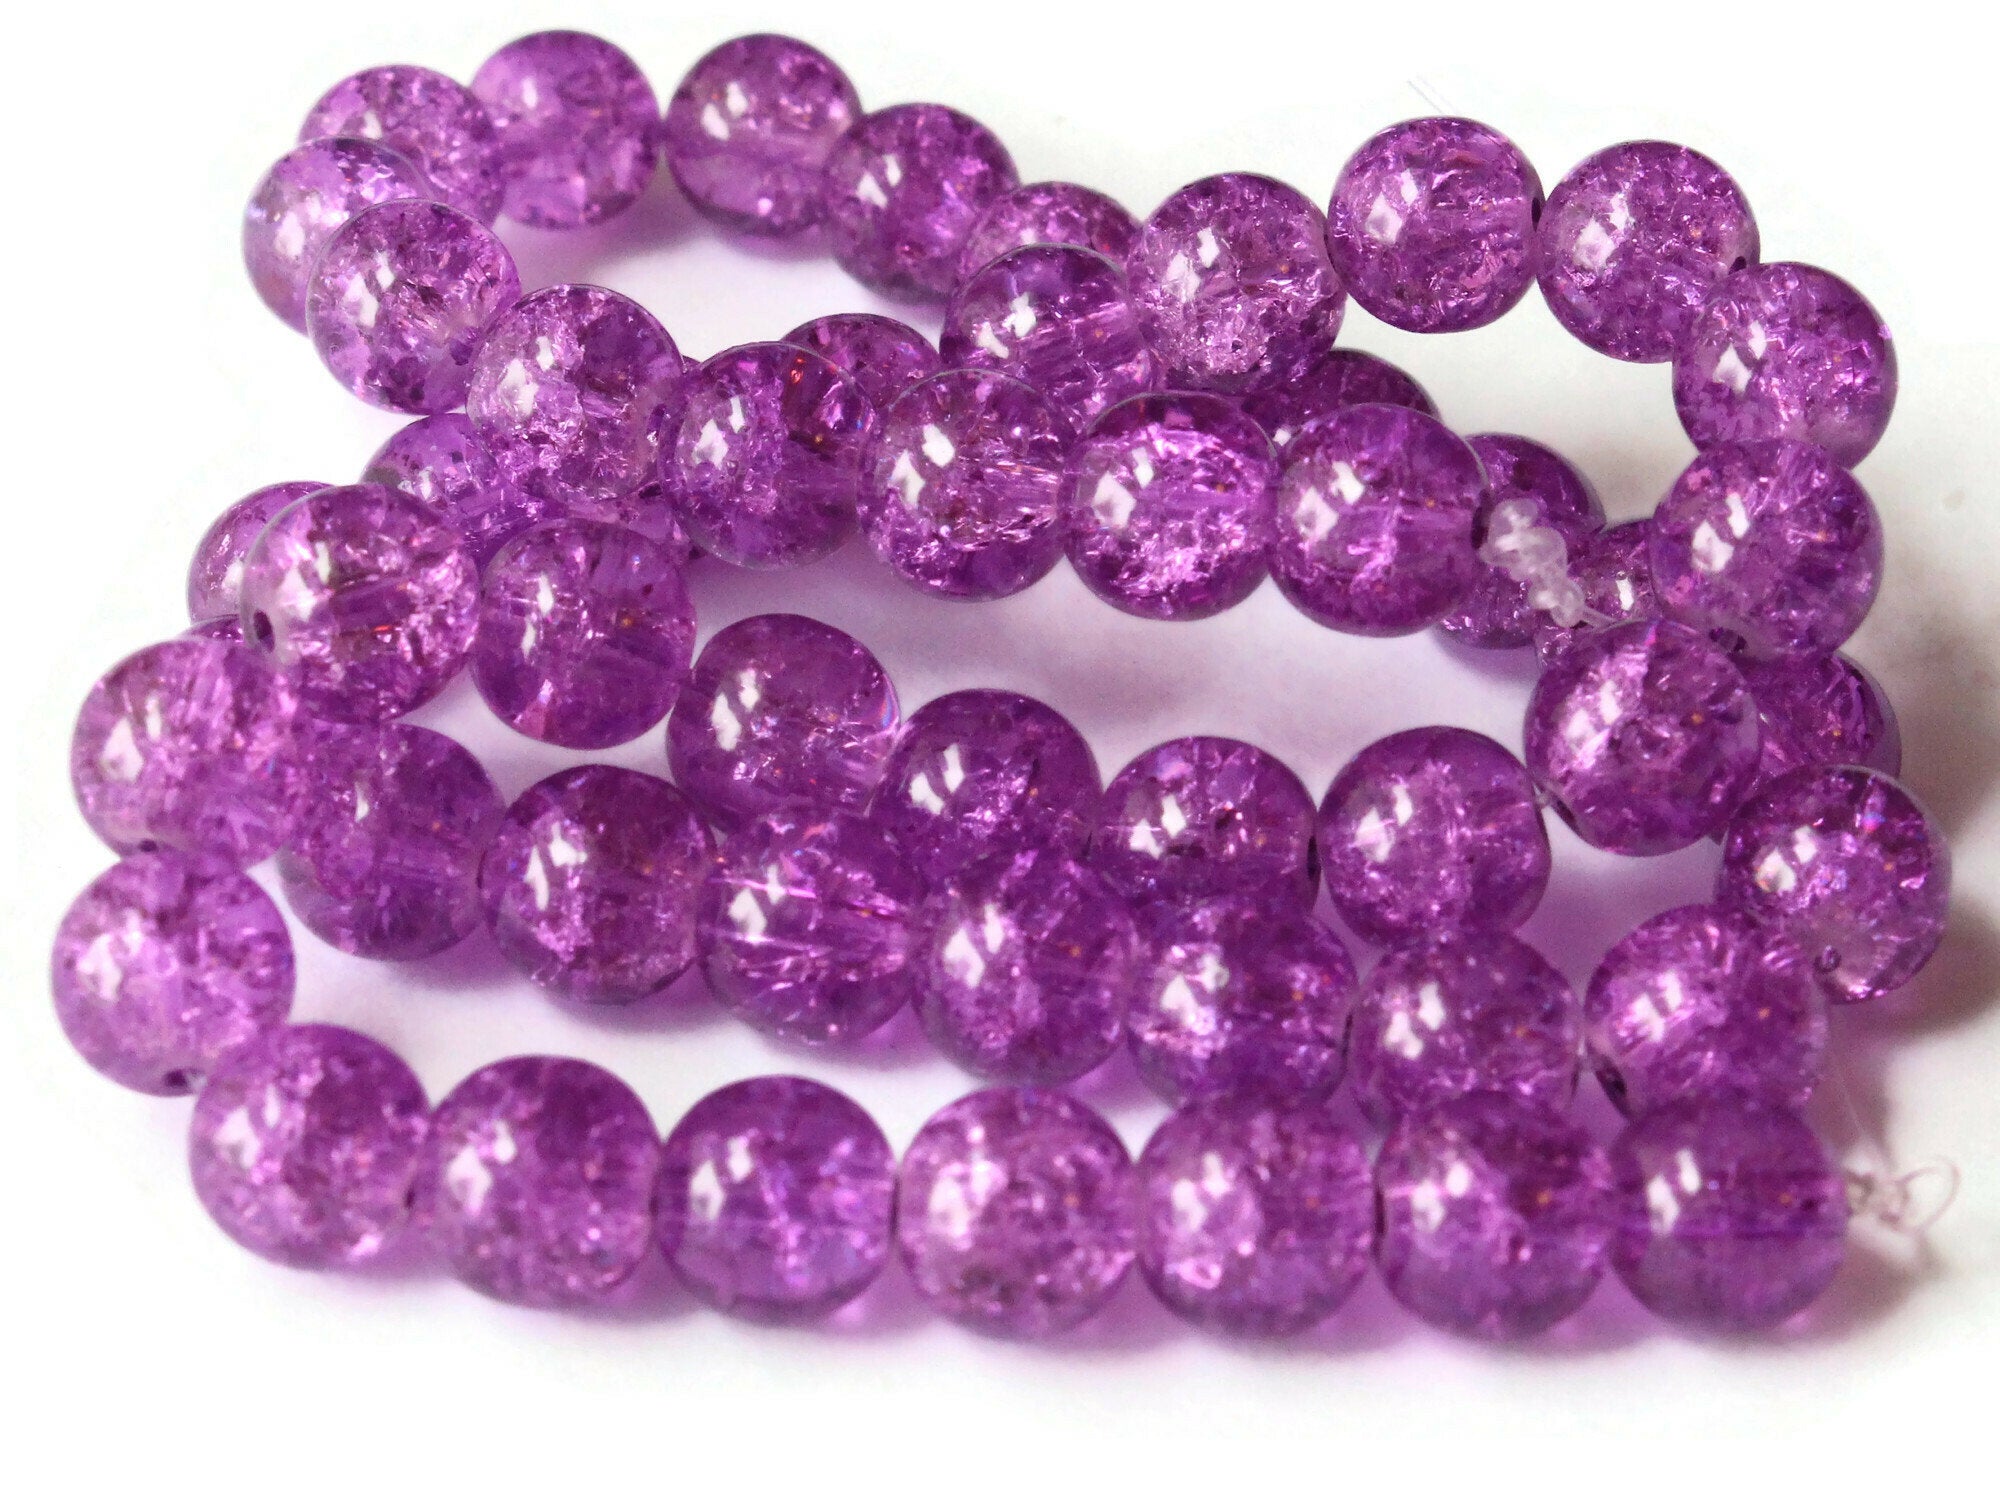 6mm Purple Glass Beads - Round Transparent Loose Beads, pkg of 60